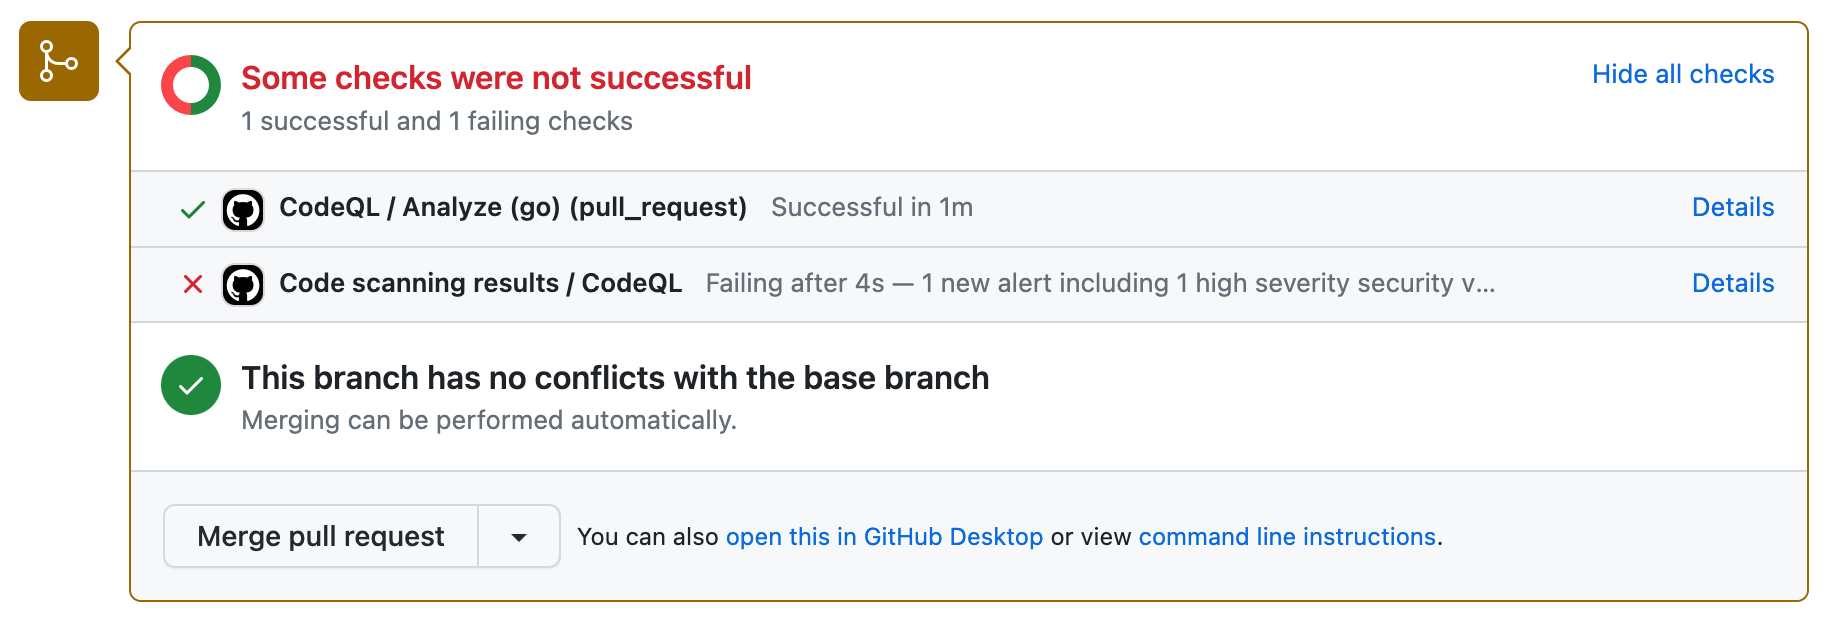 Screenshot of the merge box for a pull request. The "Code scanning results / CodeQL" check has "1 new alert including 1 high severity security v..."